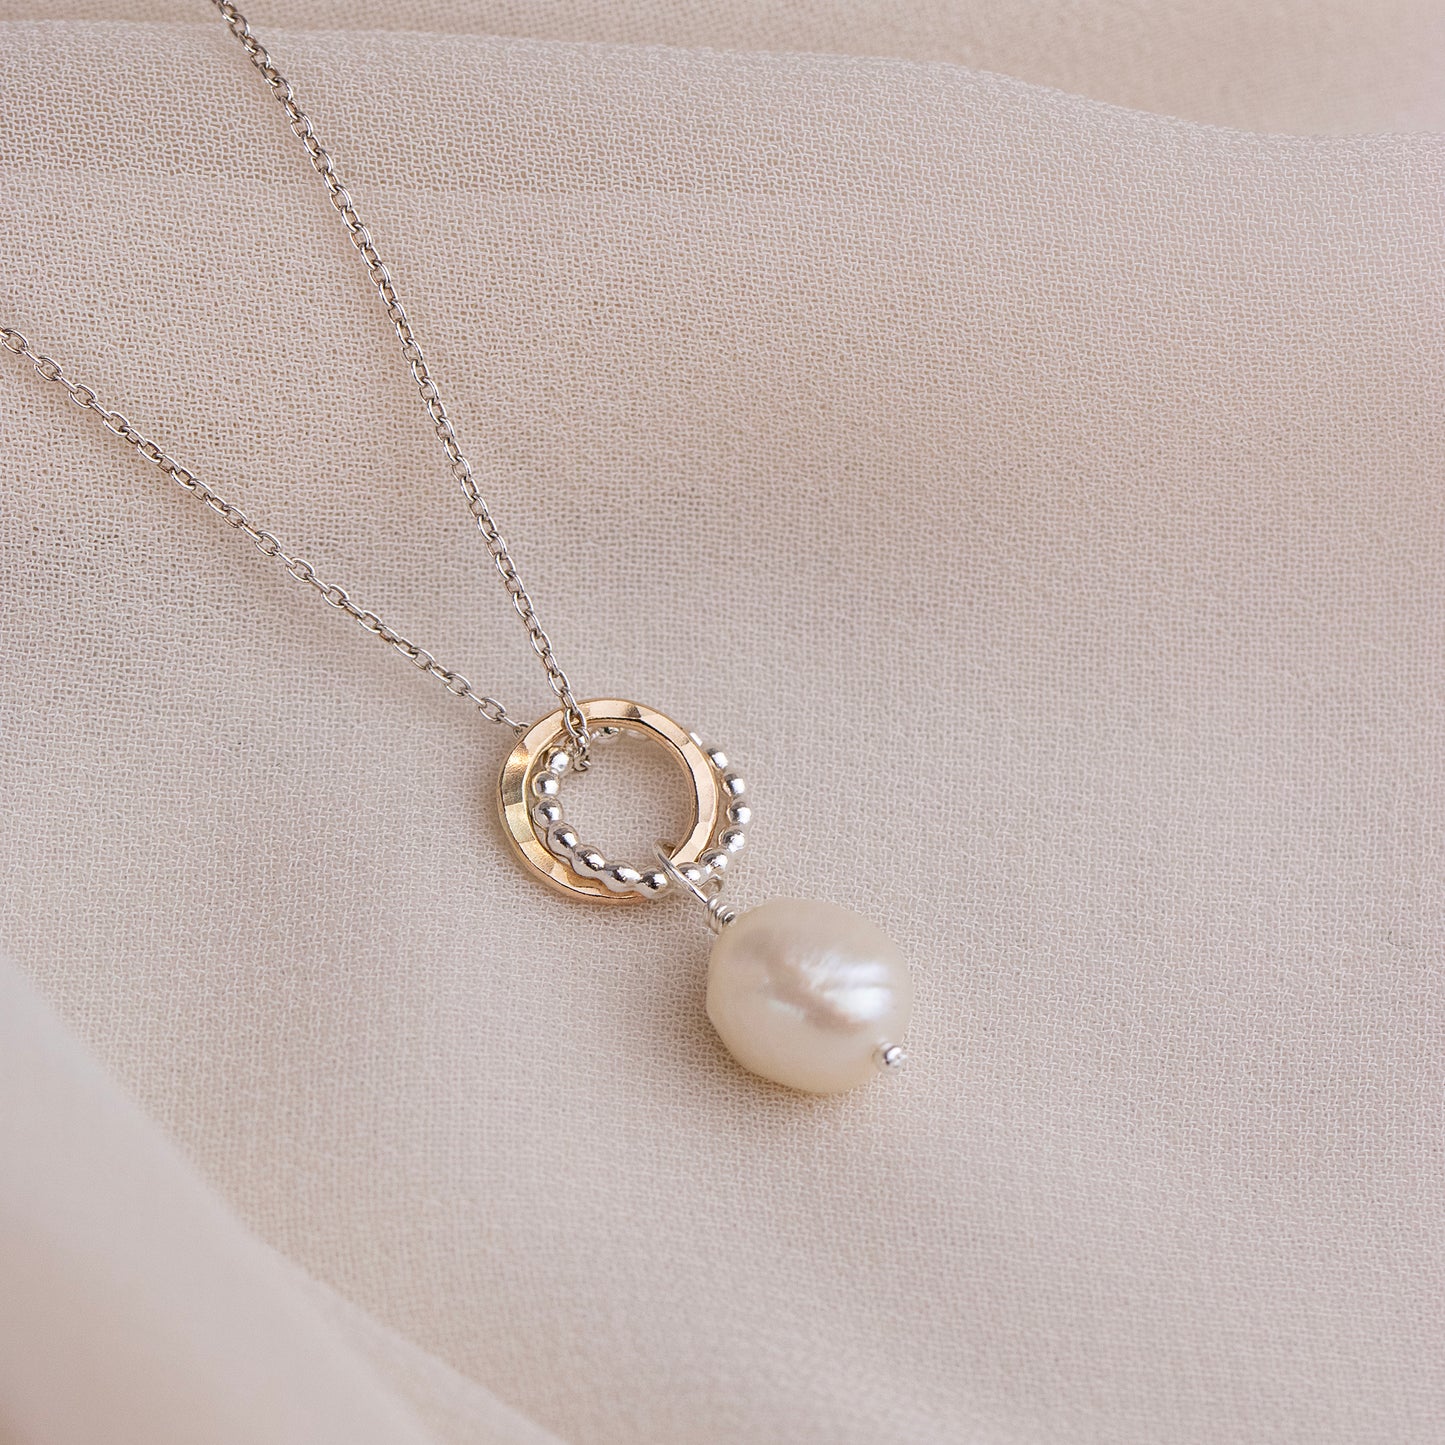 Gift for Friend & Bridesmaid - Love Knot Pearl Necklace - Silver & Gold